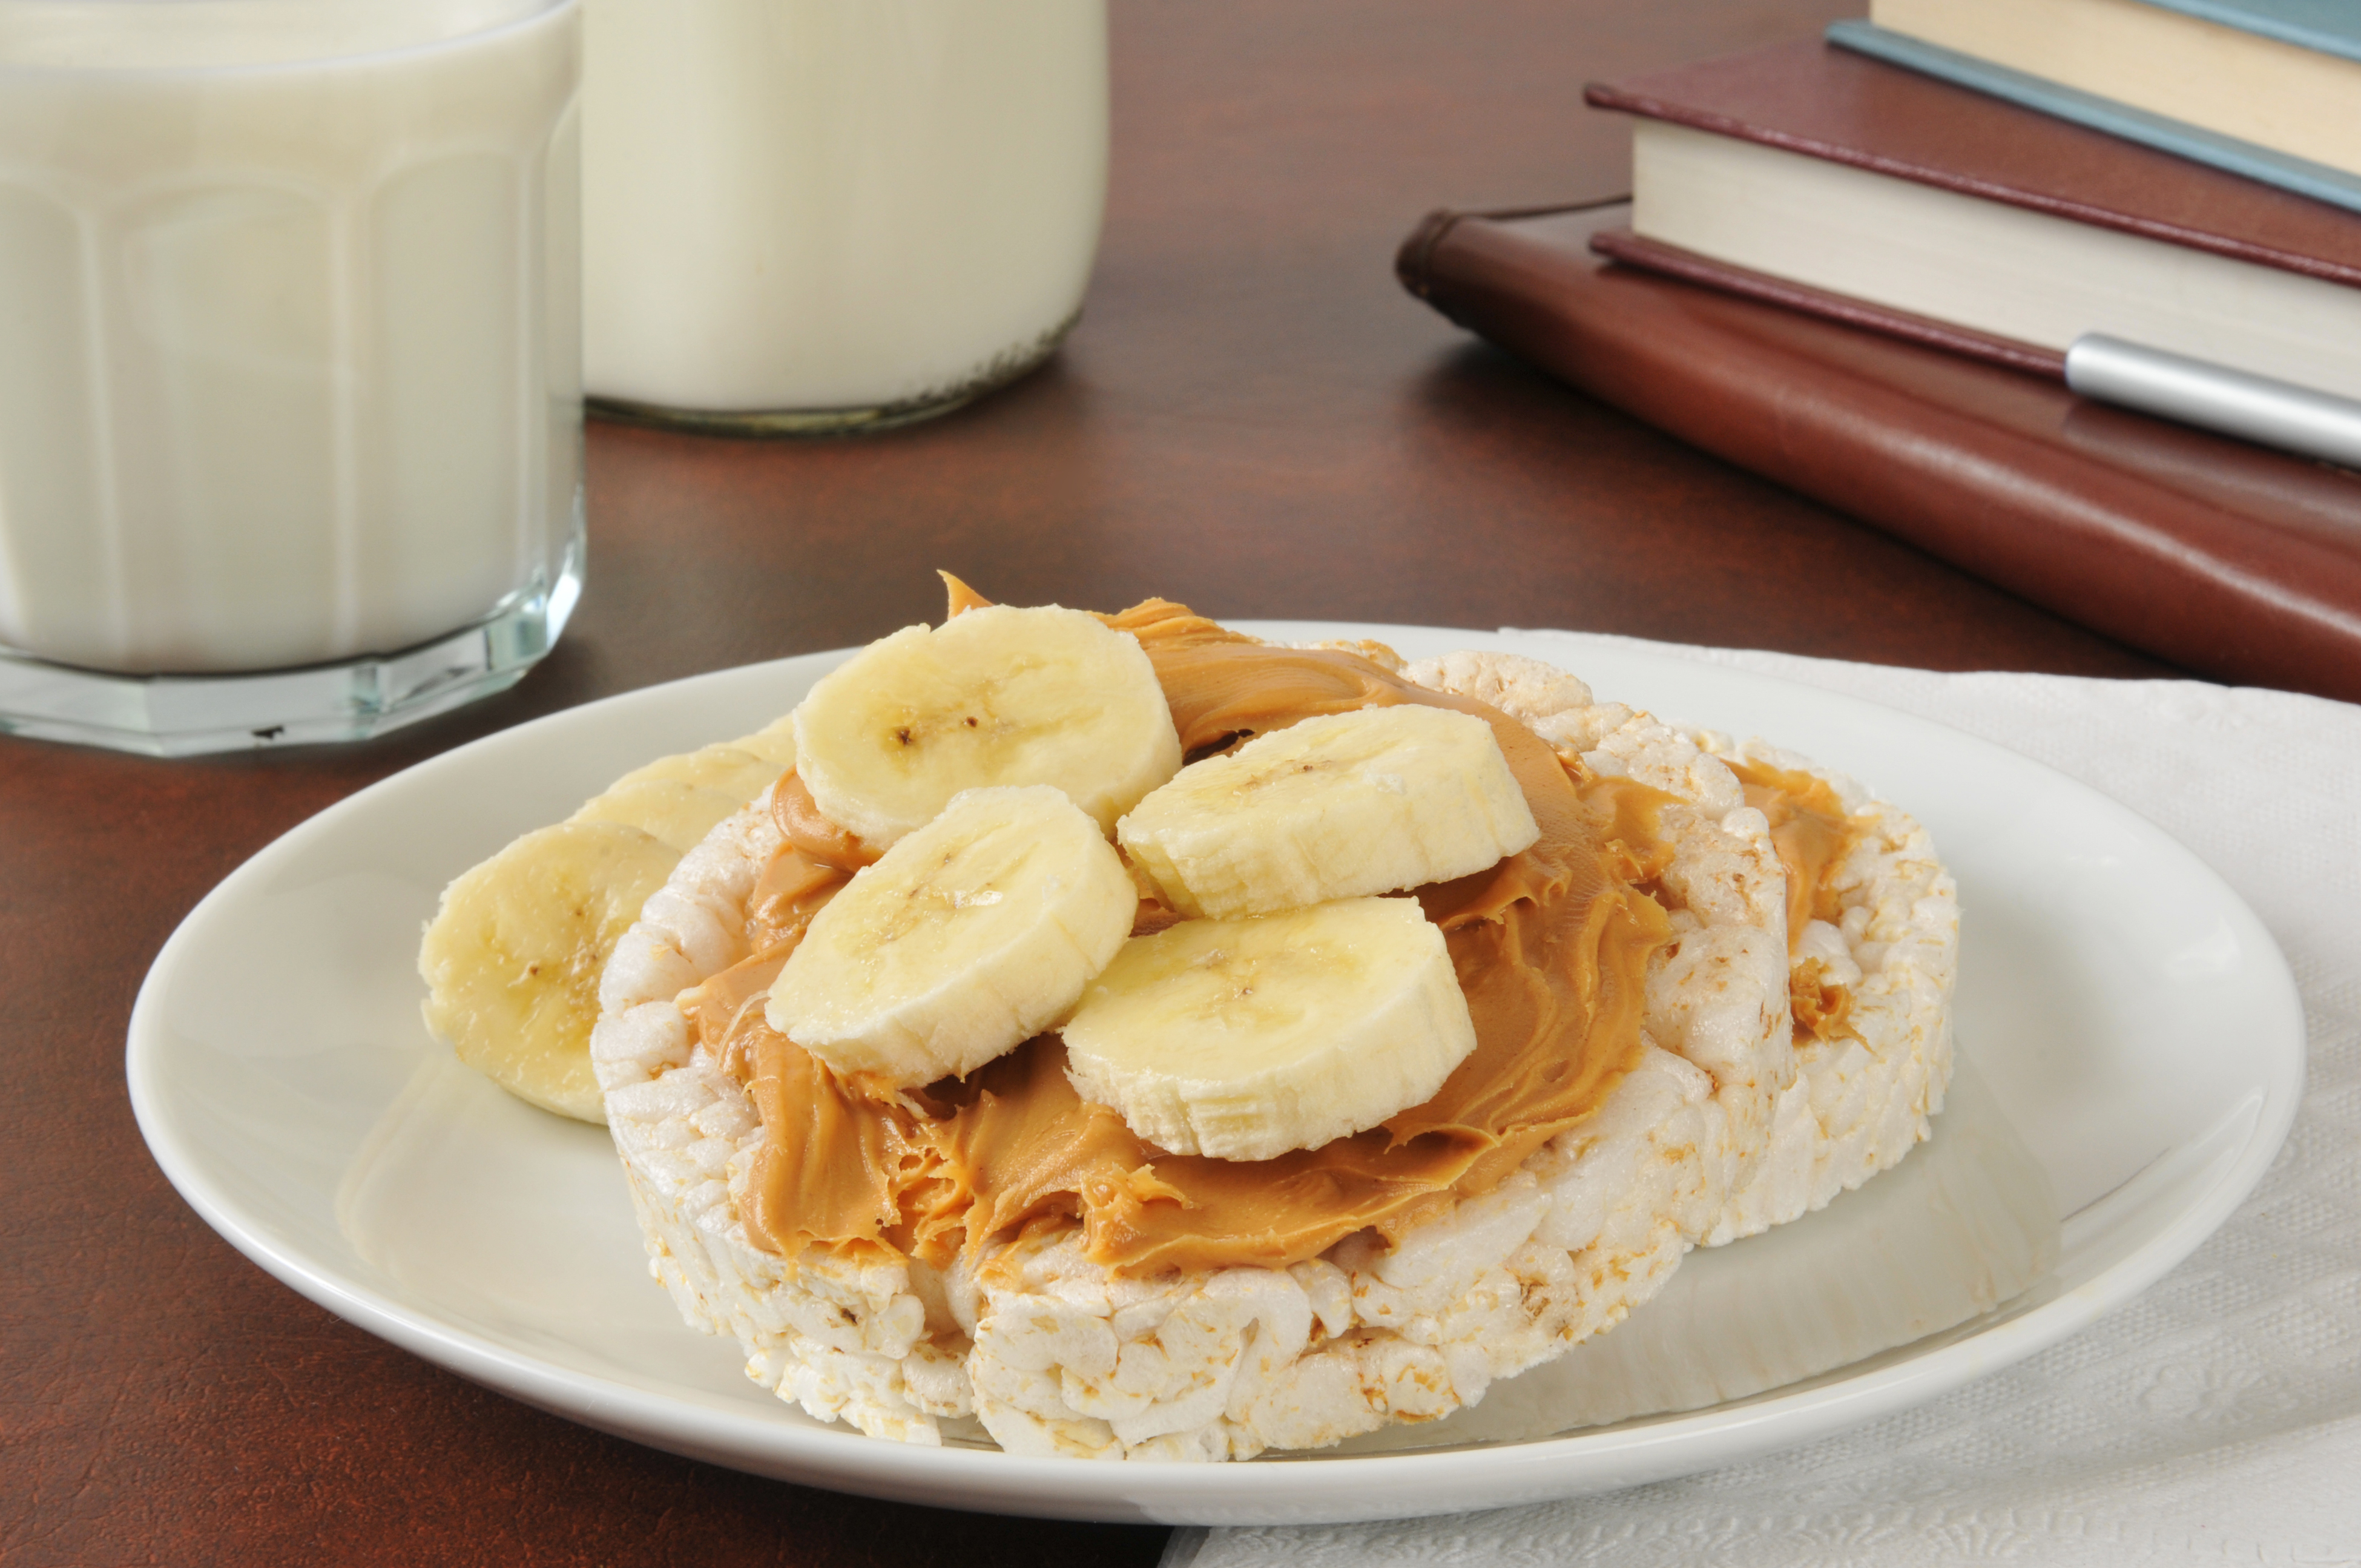 A plate with a rice cake topped with peanut butter and four banana slices.